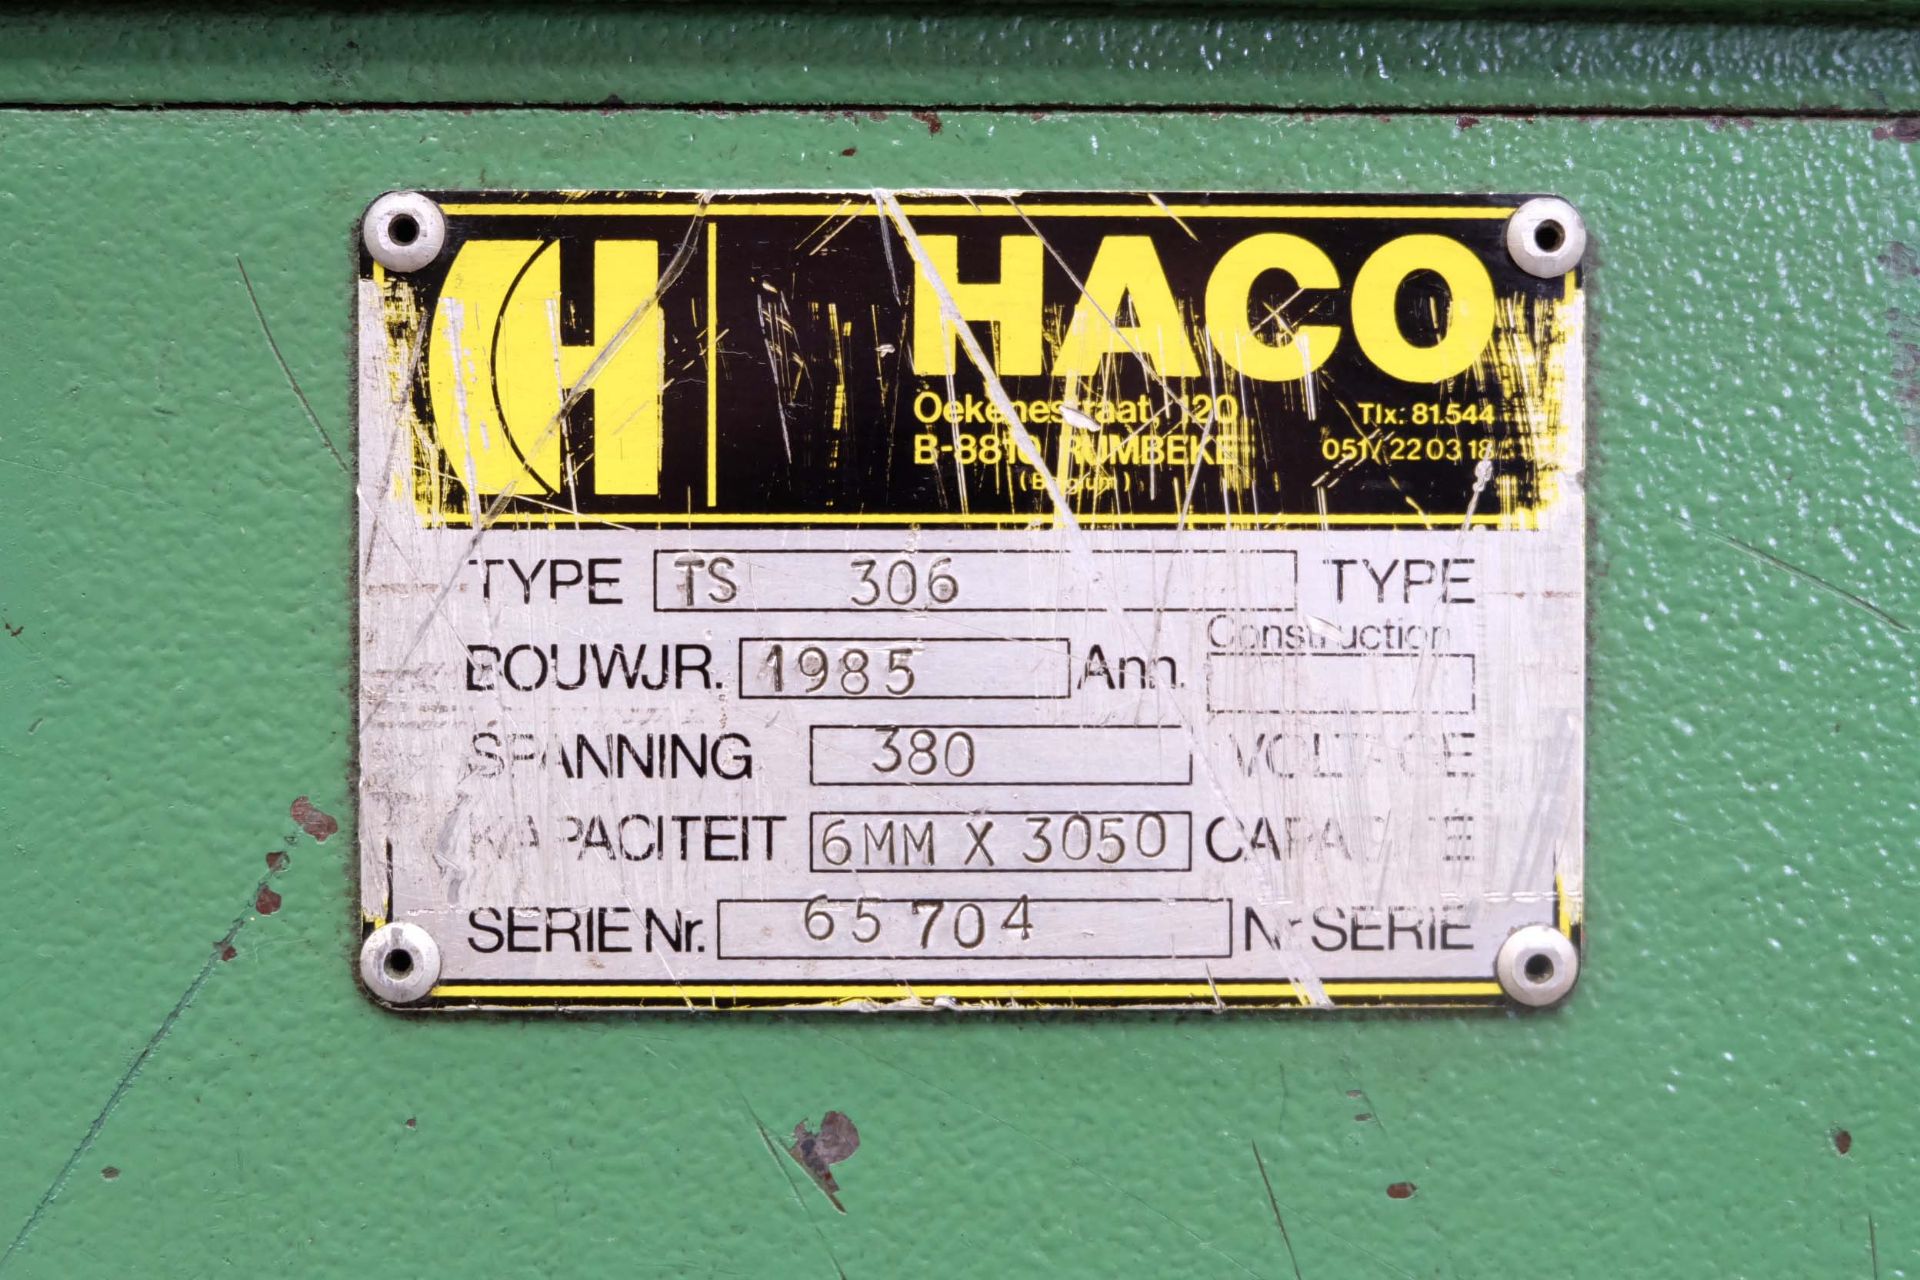 Haco Type TS 306 Hydraulic Guillotine. Capacity 6mm x 3050mm. With Squaring Arm & Front Supports. - Image 8 of 8